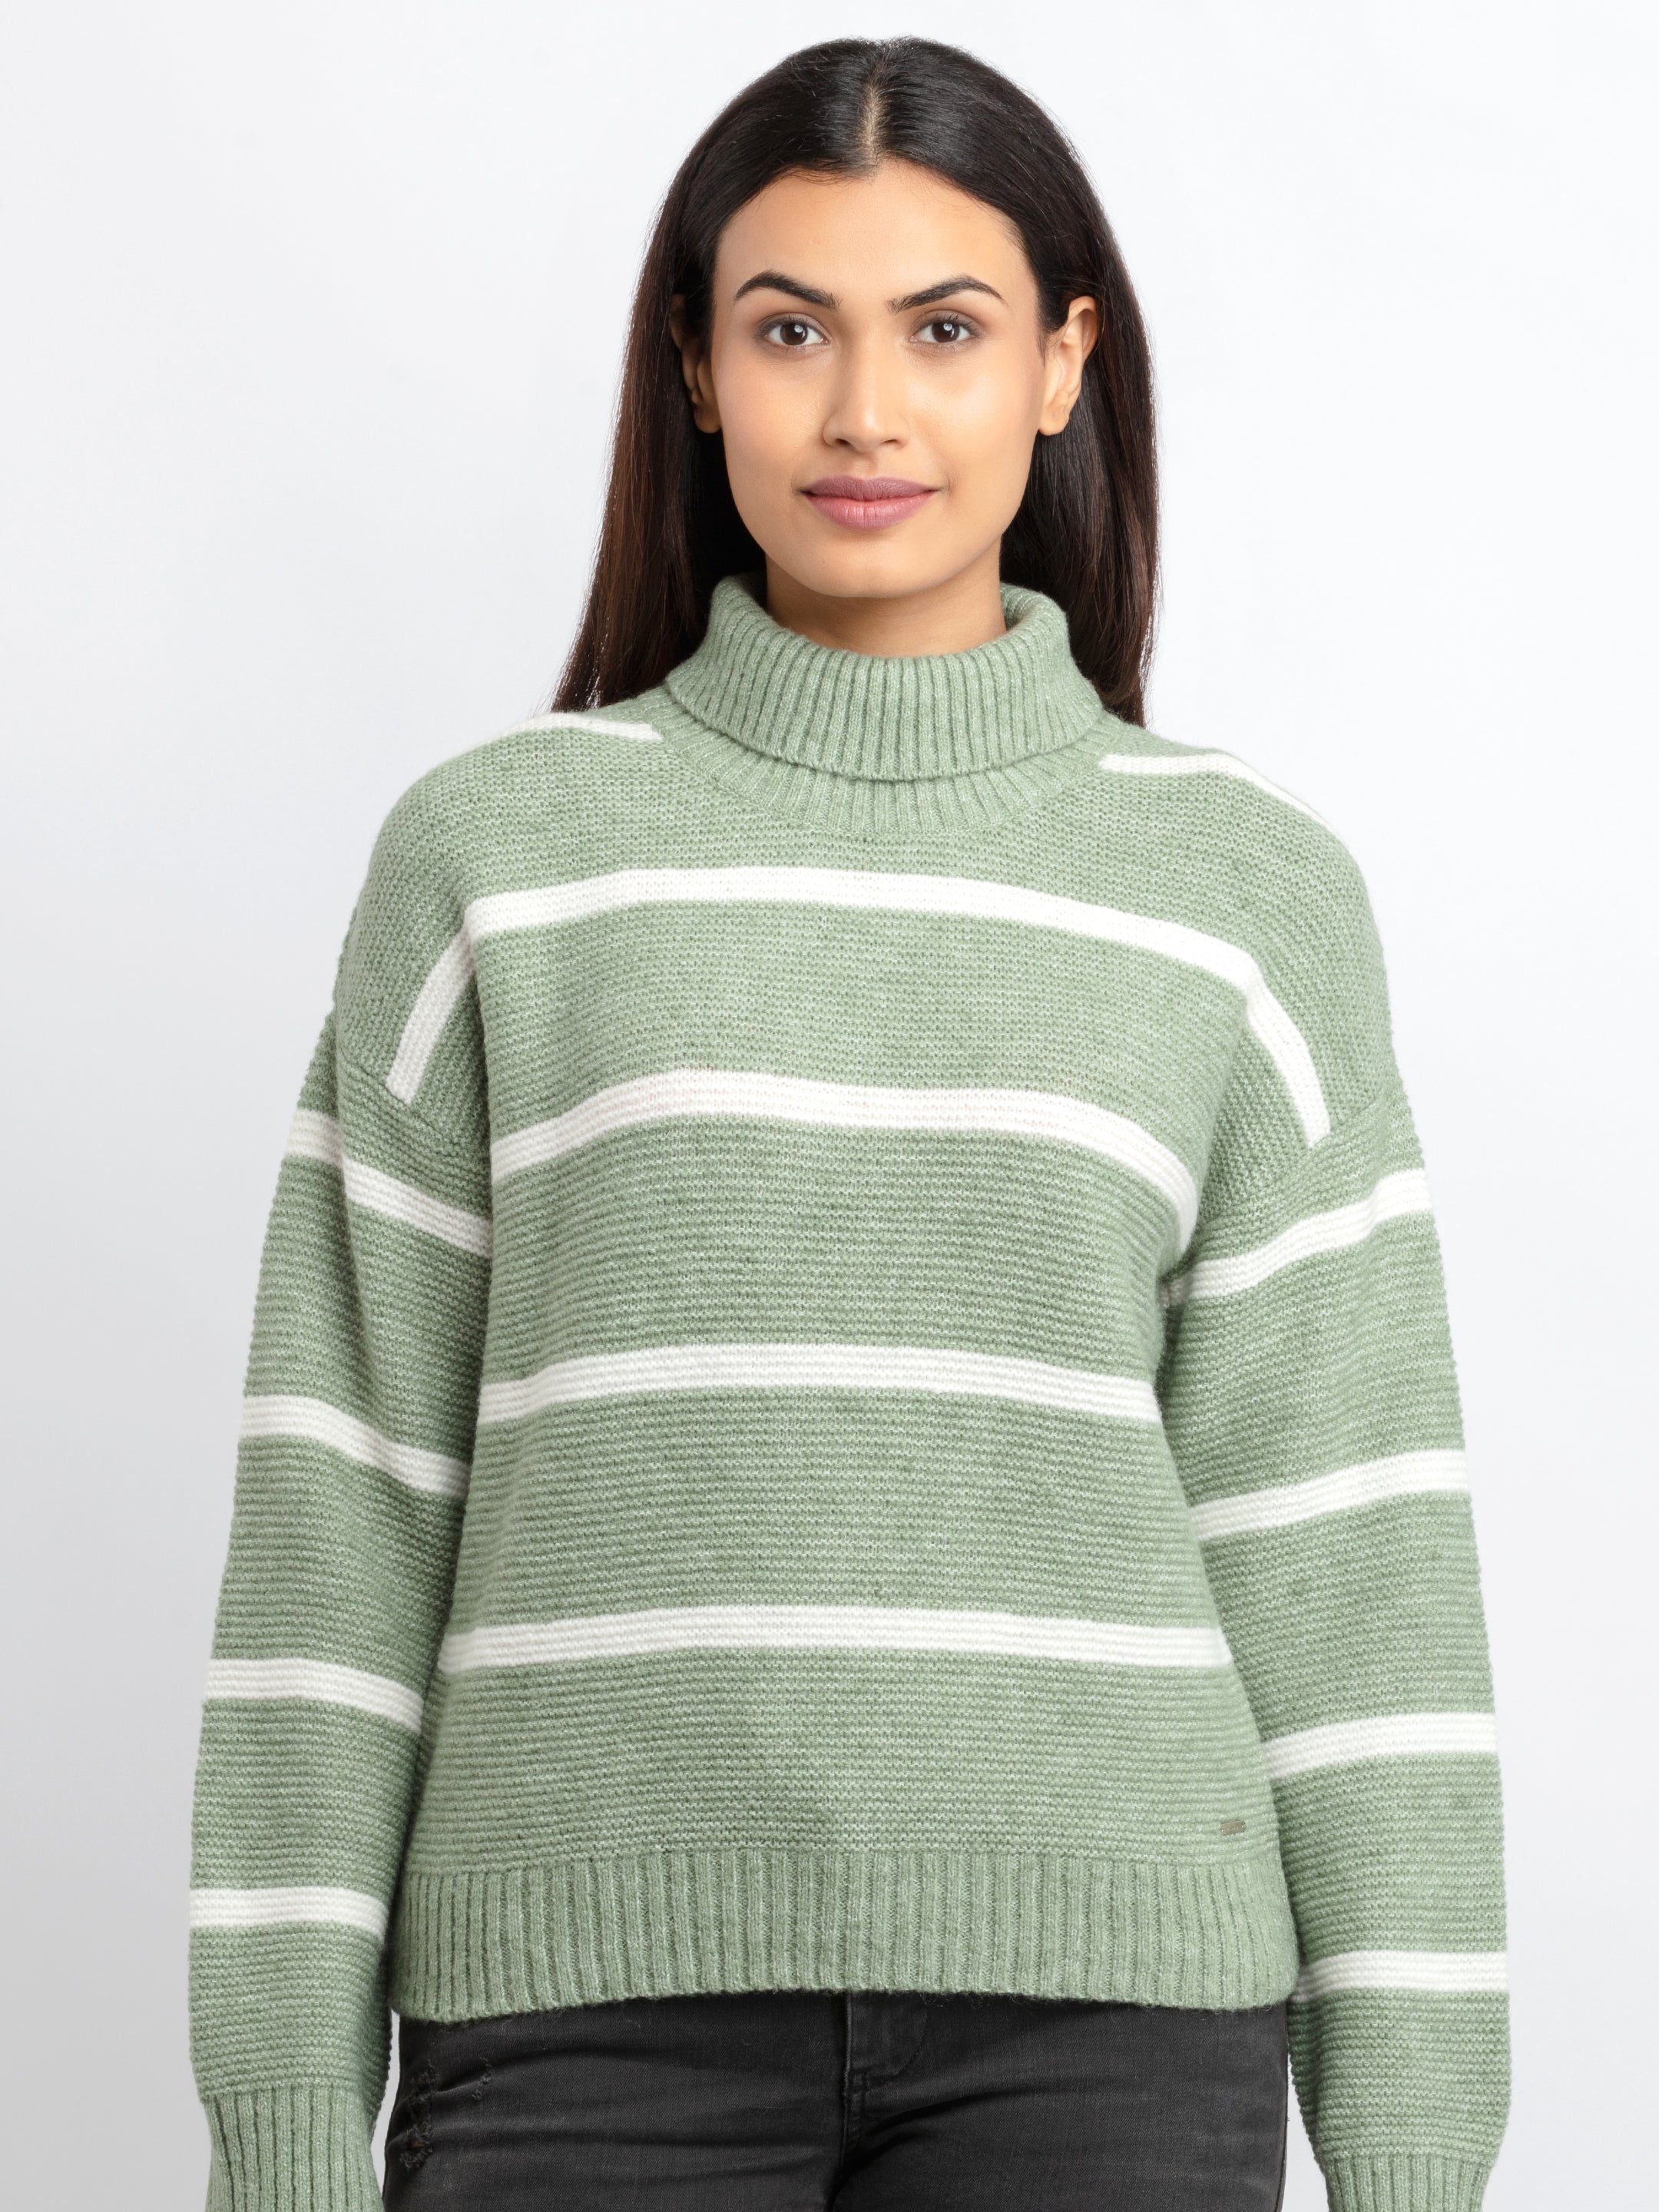 turtle neck sweater for women